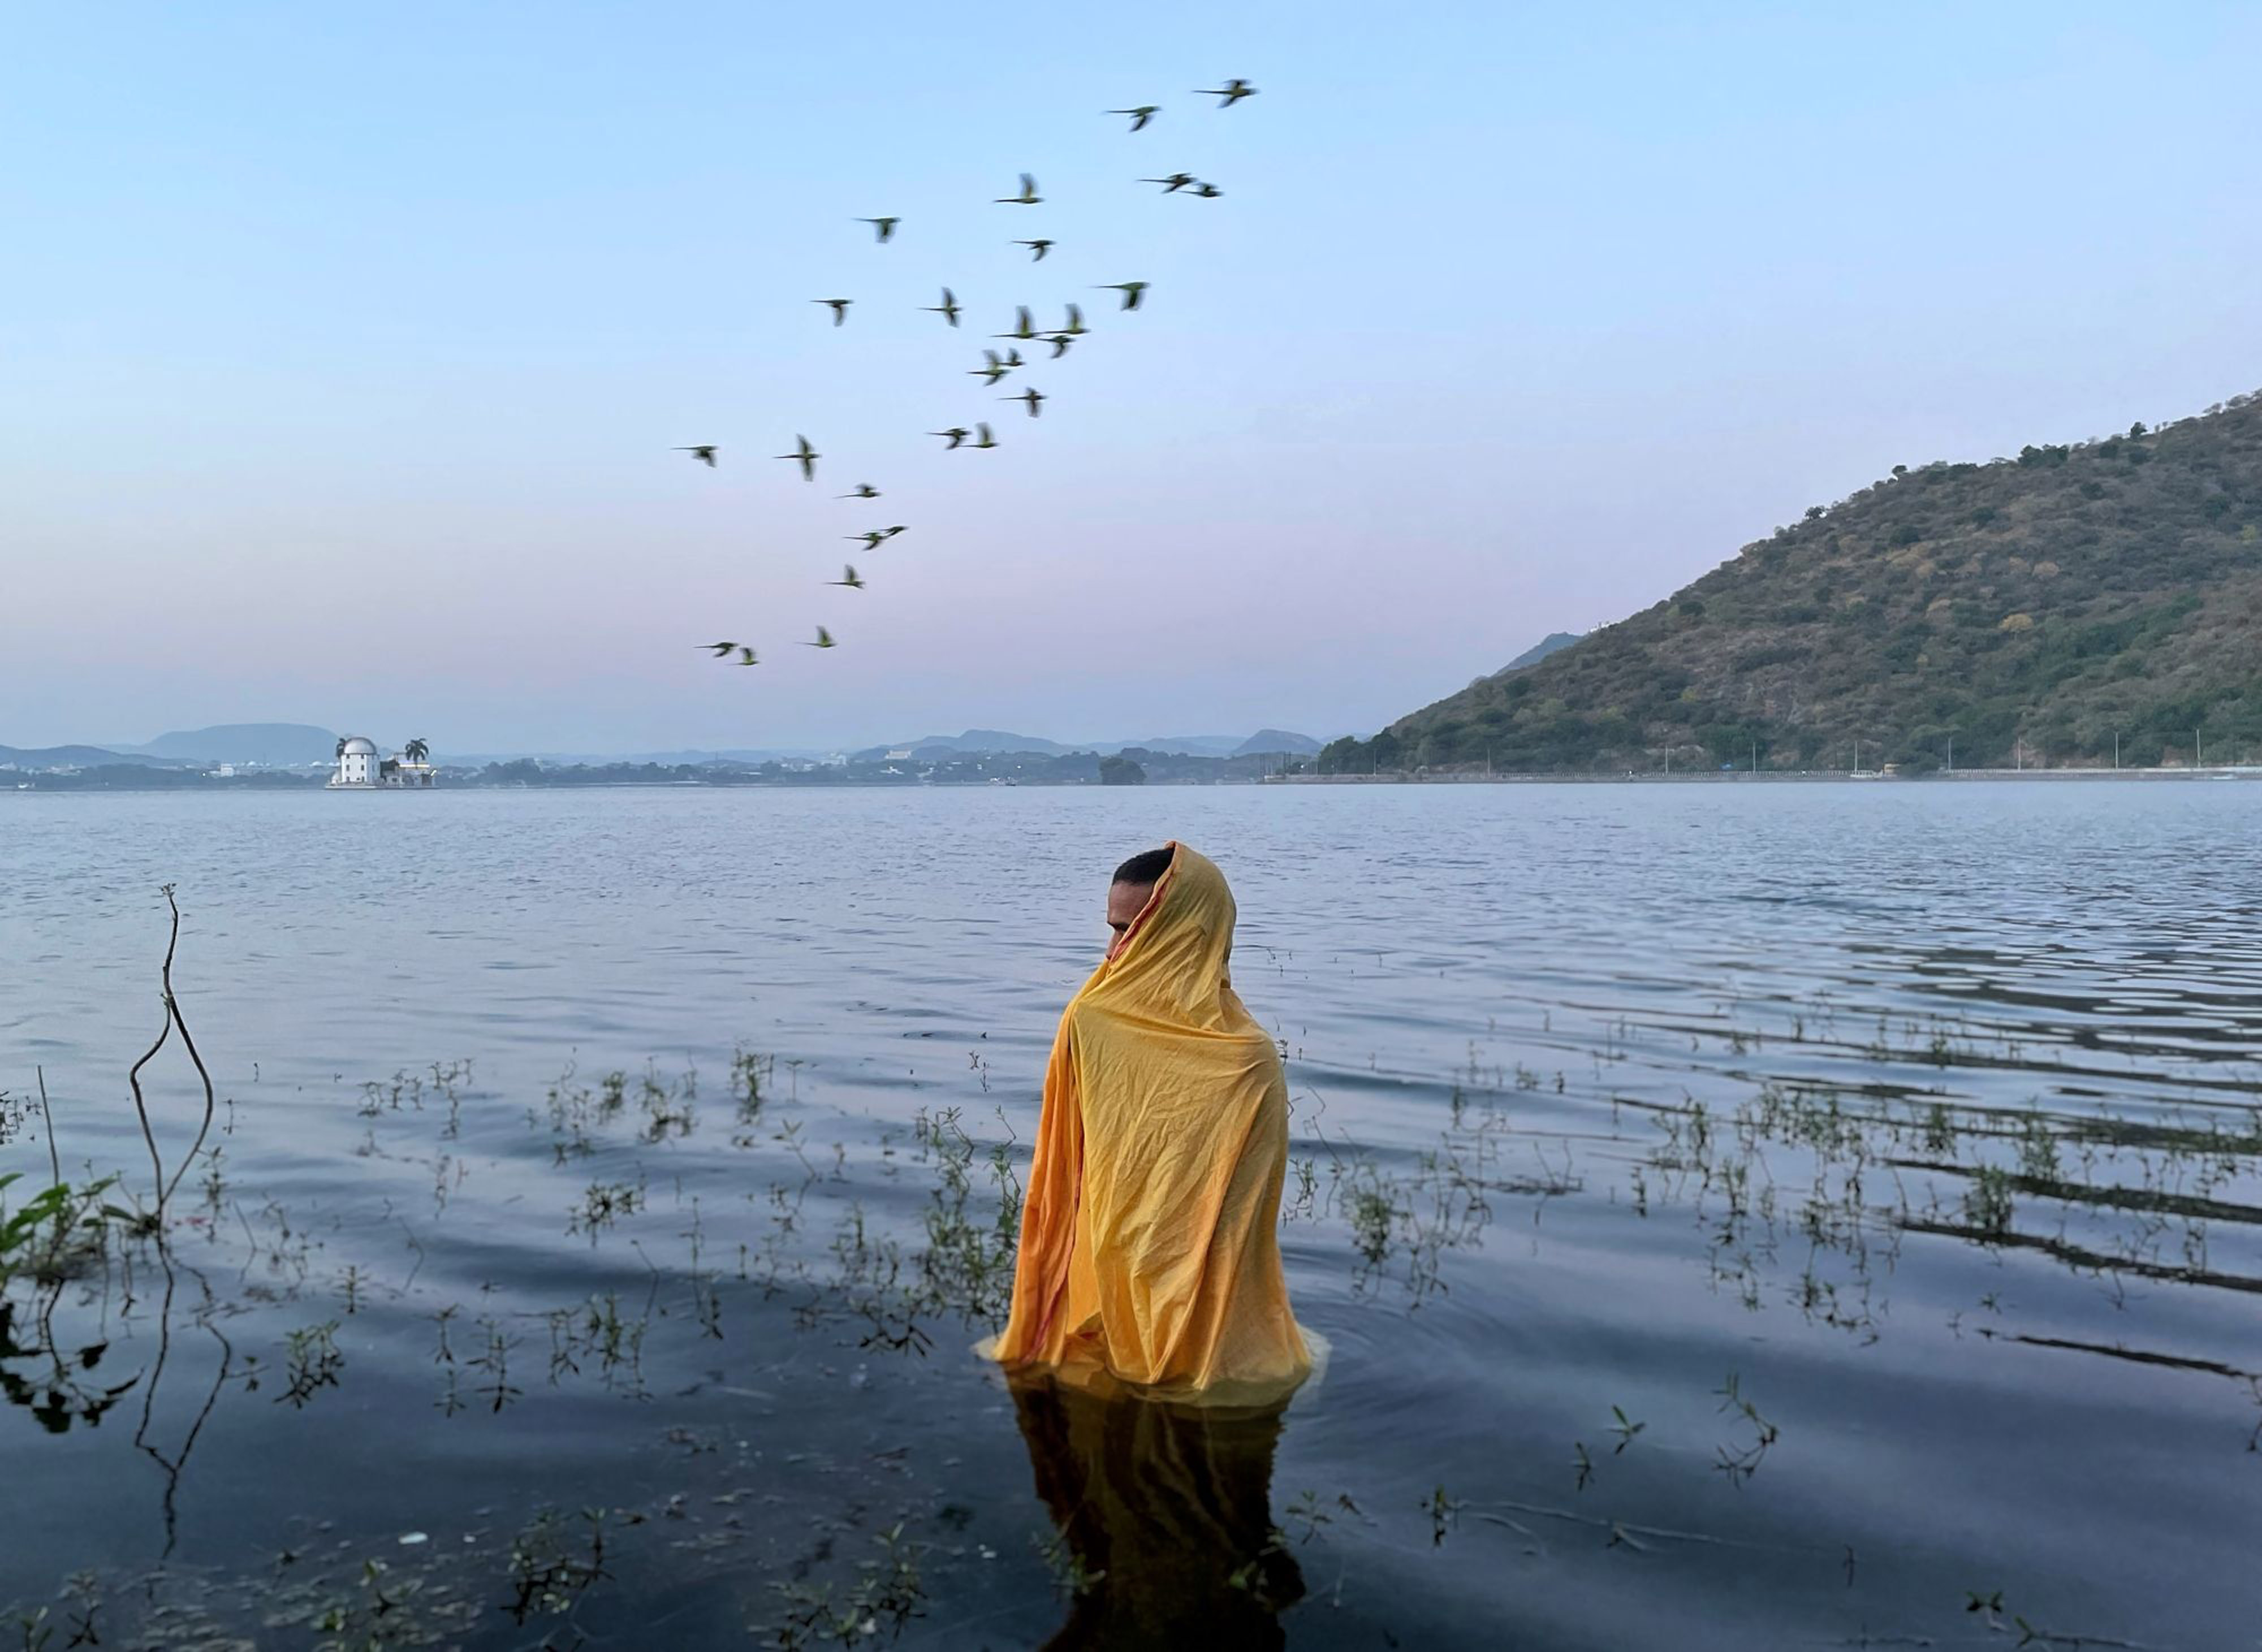 'Faith above everything'. A man standing in freezing cold water waiting for Sun God to arrive during Chatth Puja Festival. © Amish Jain/TNC Photo Contest